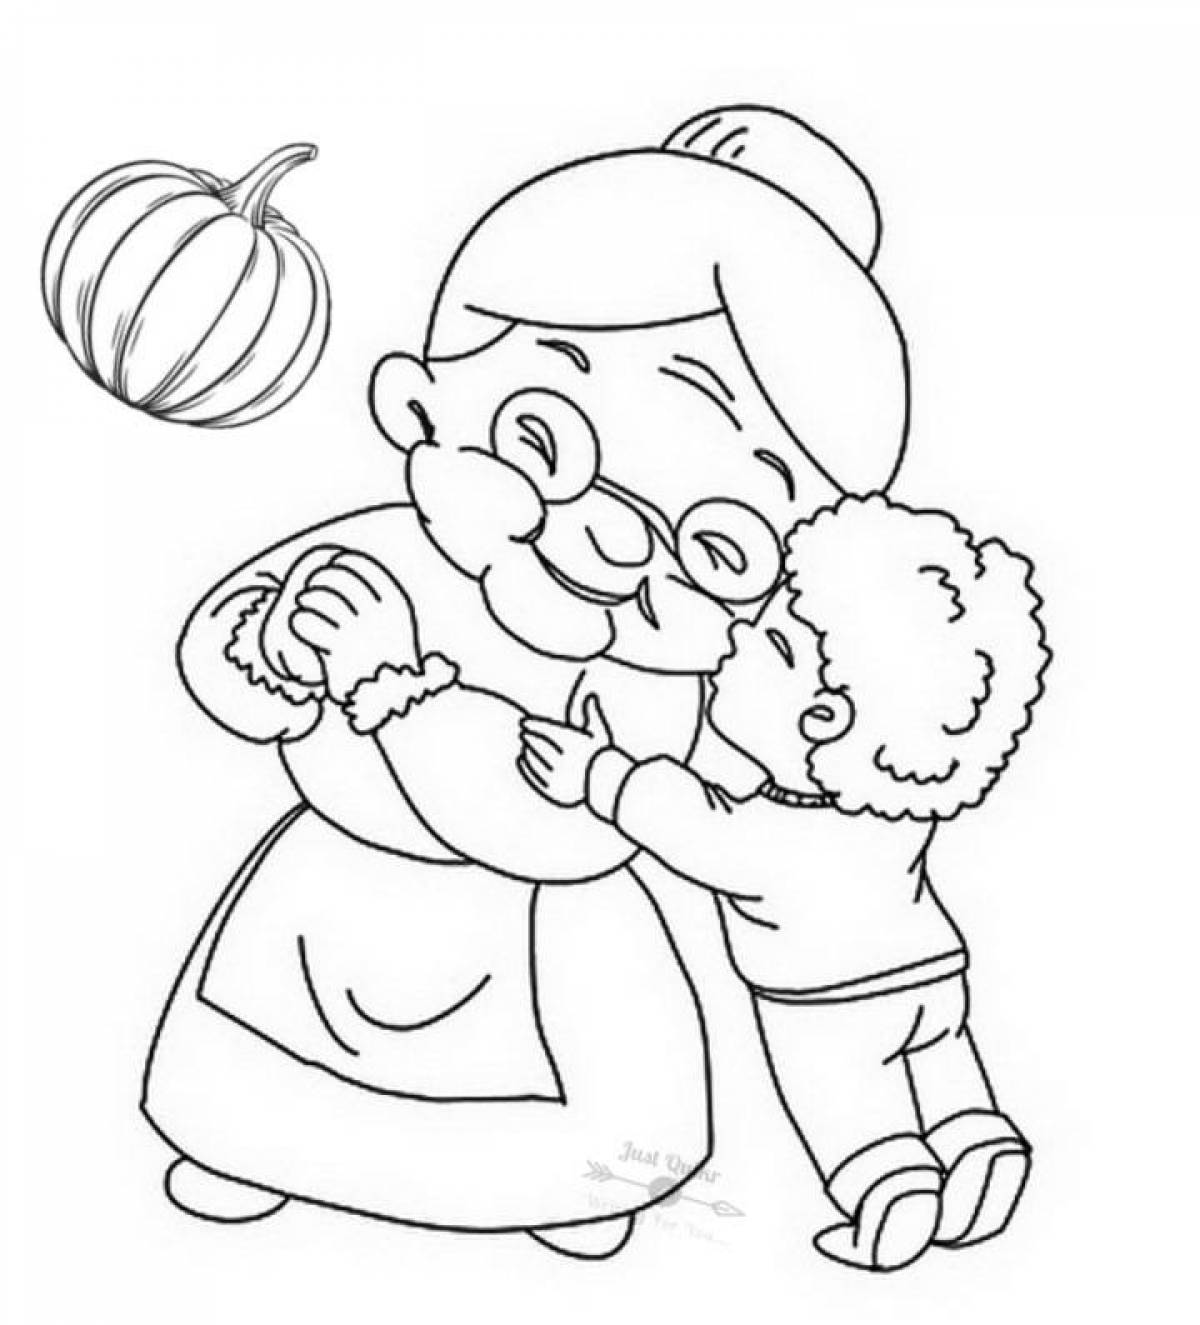 Great 'happy birthday granny' coloring page